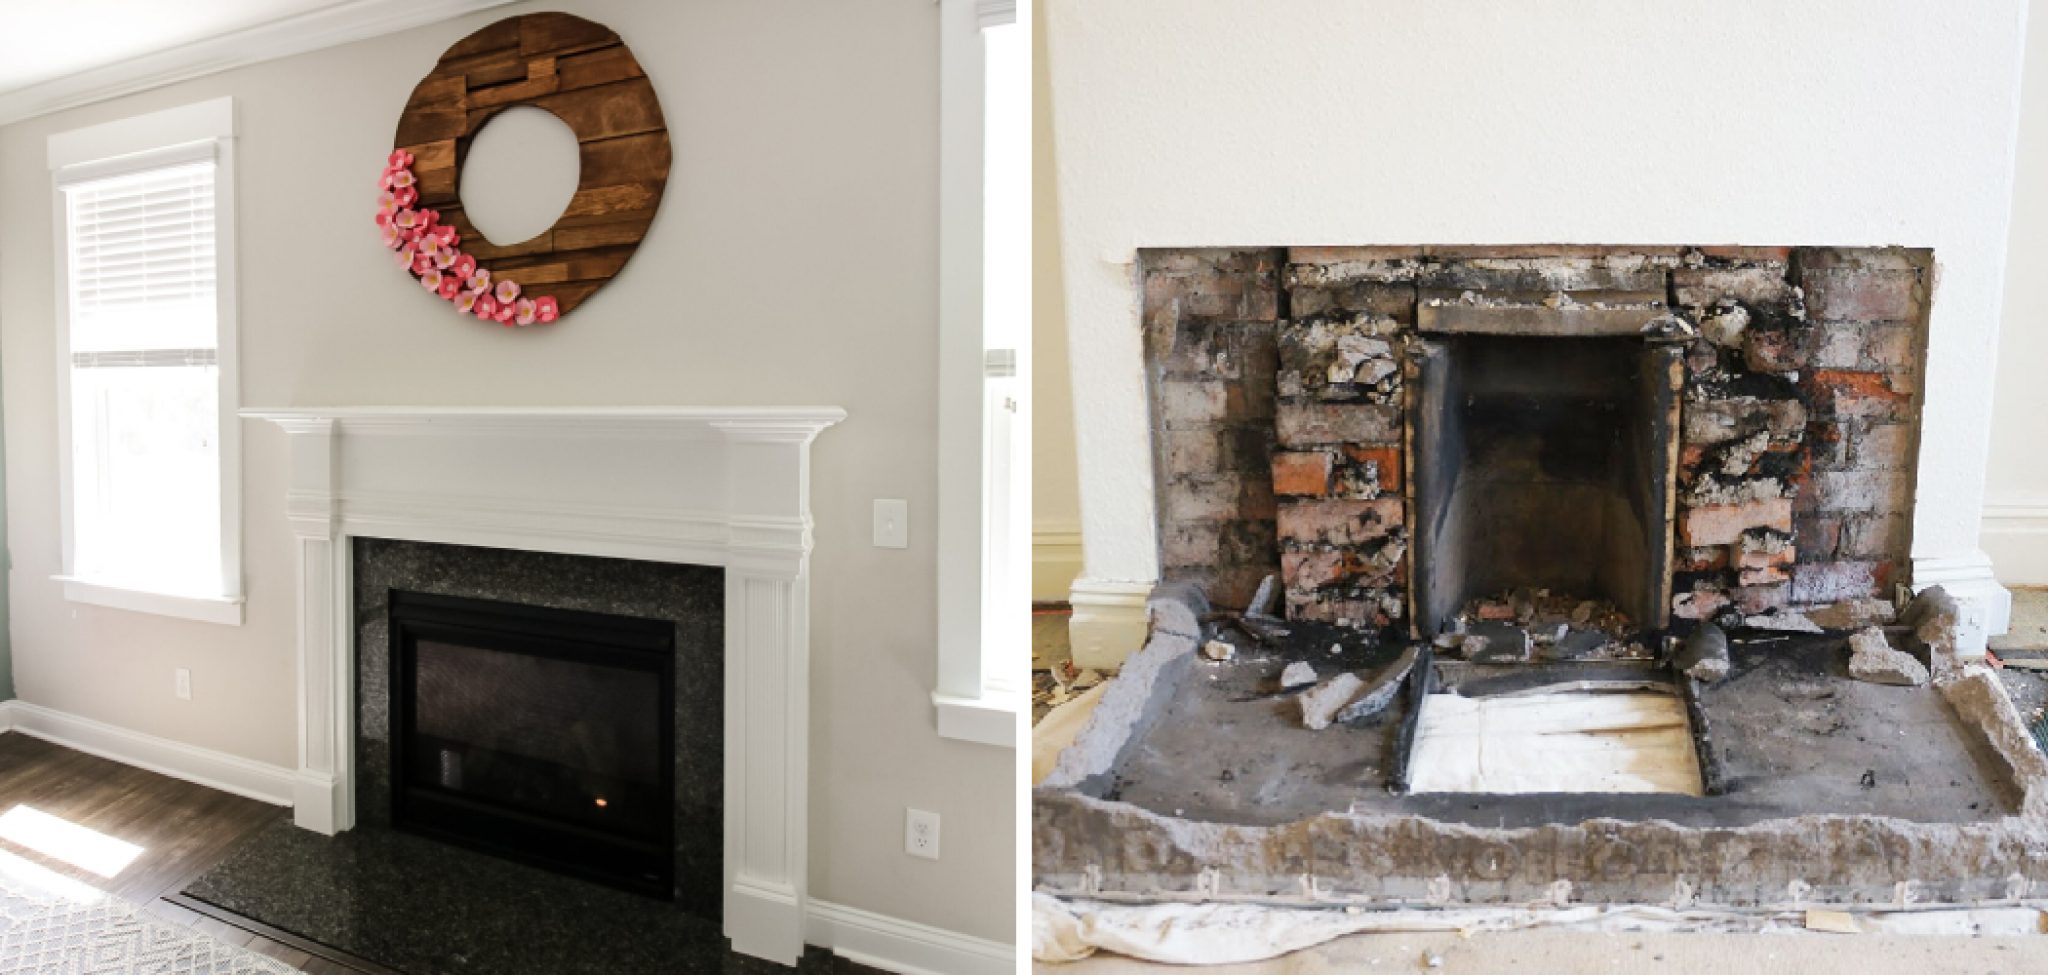 How to Remove Fireplace MantelTitle